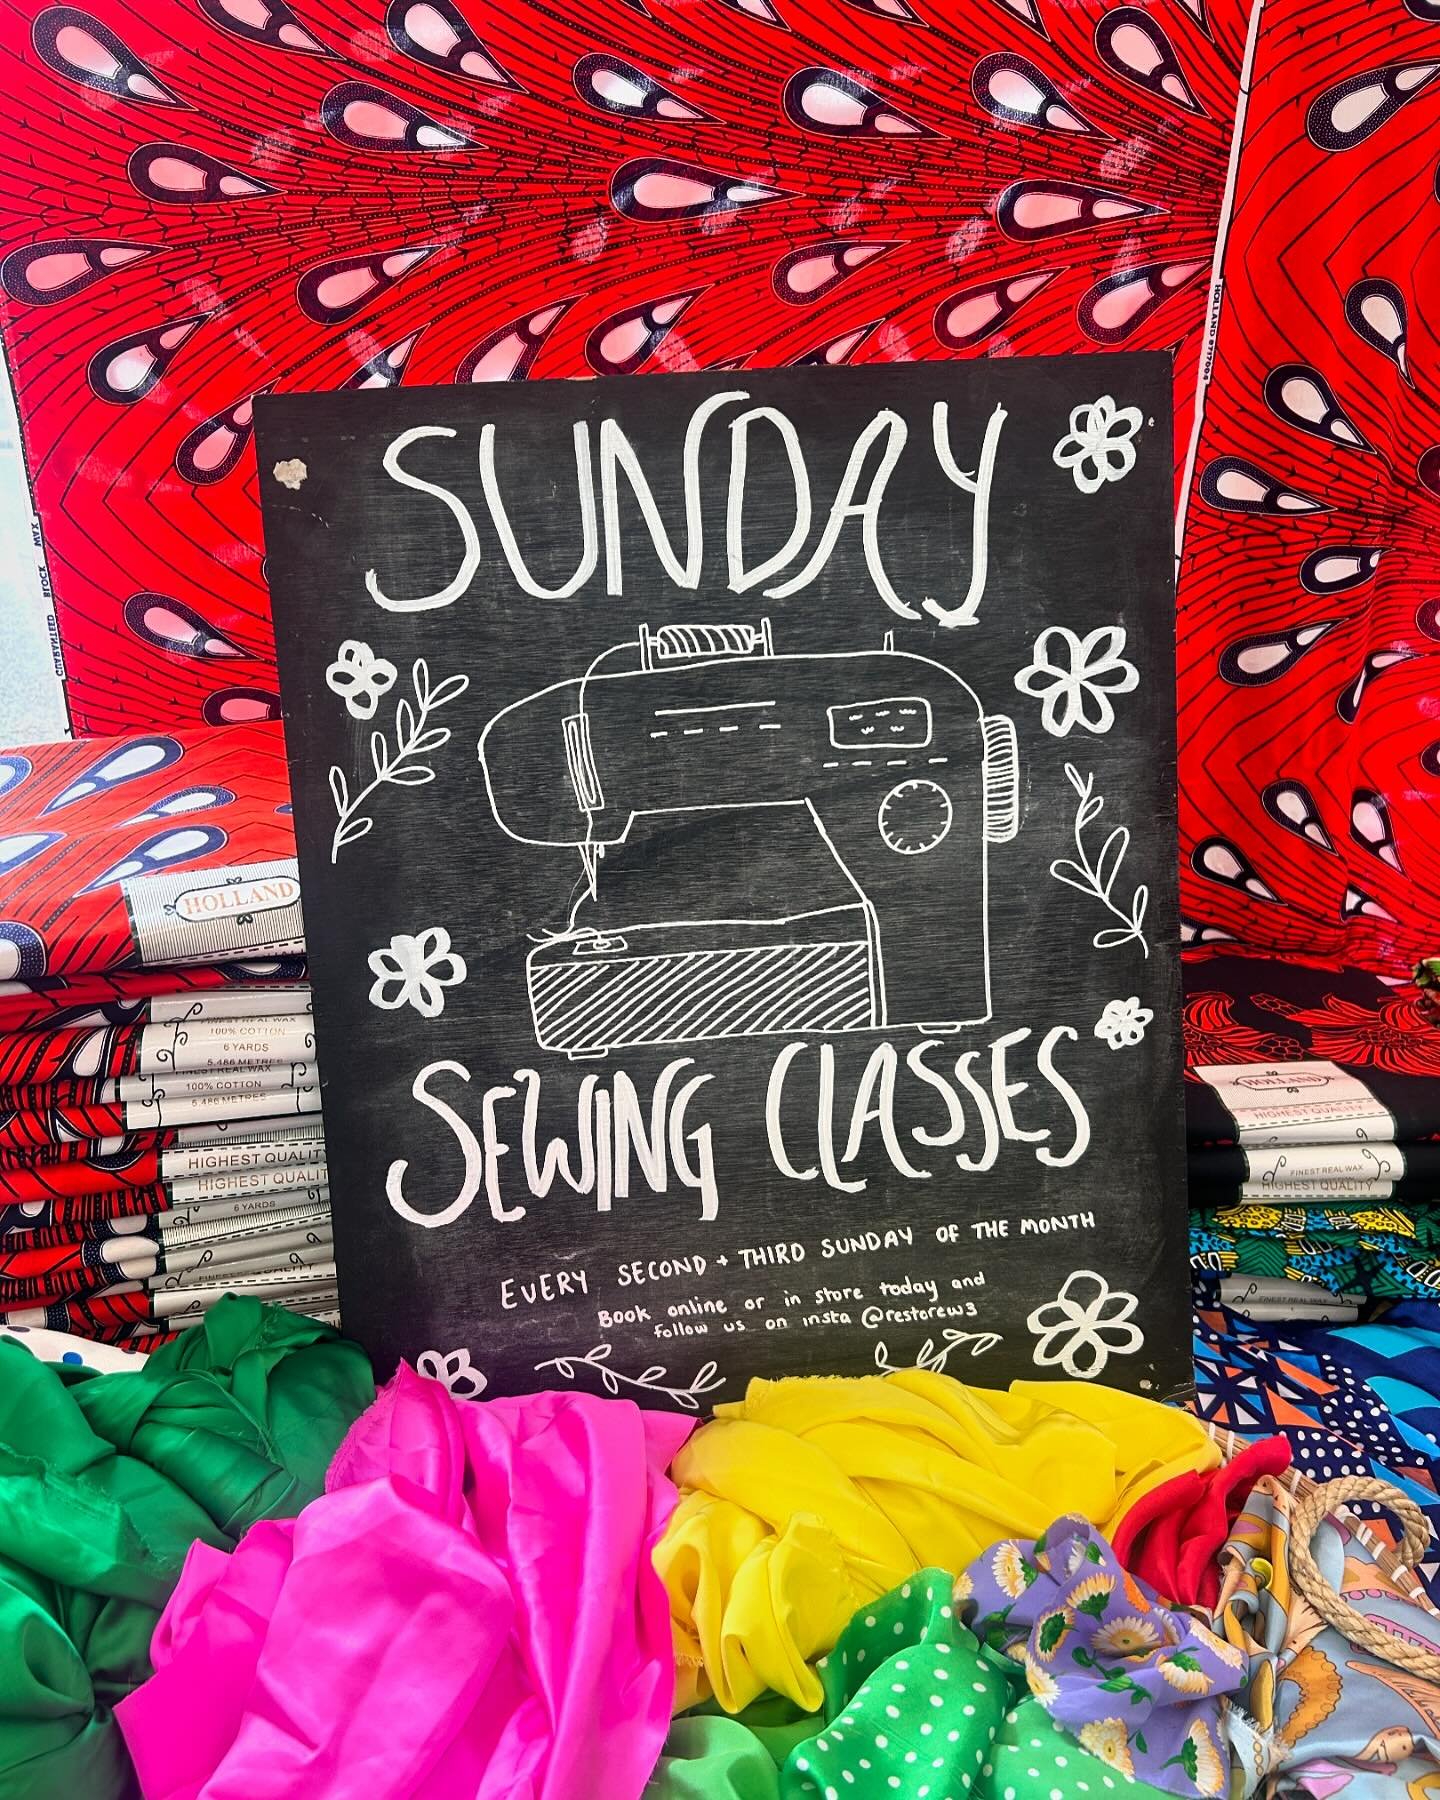 Do you want to learn to sew and upcycle your old garments into new things? First step is to learn the basics of using a sewing machine! Spaces available on Sundays class 11-1pm. Fabrics also available for use in class or bring your own projects along